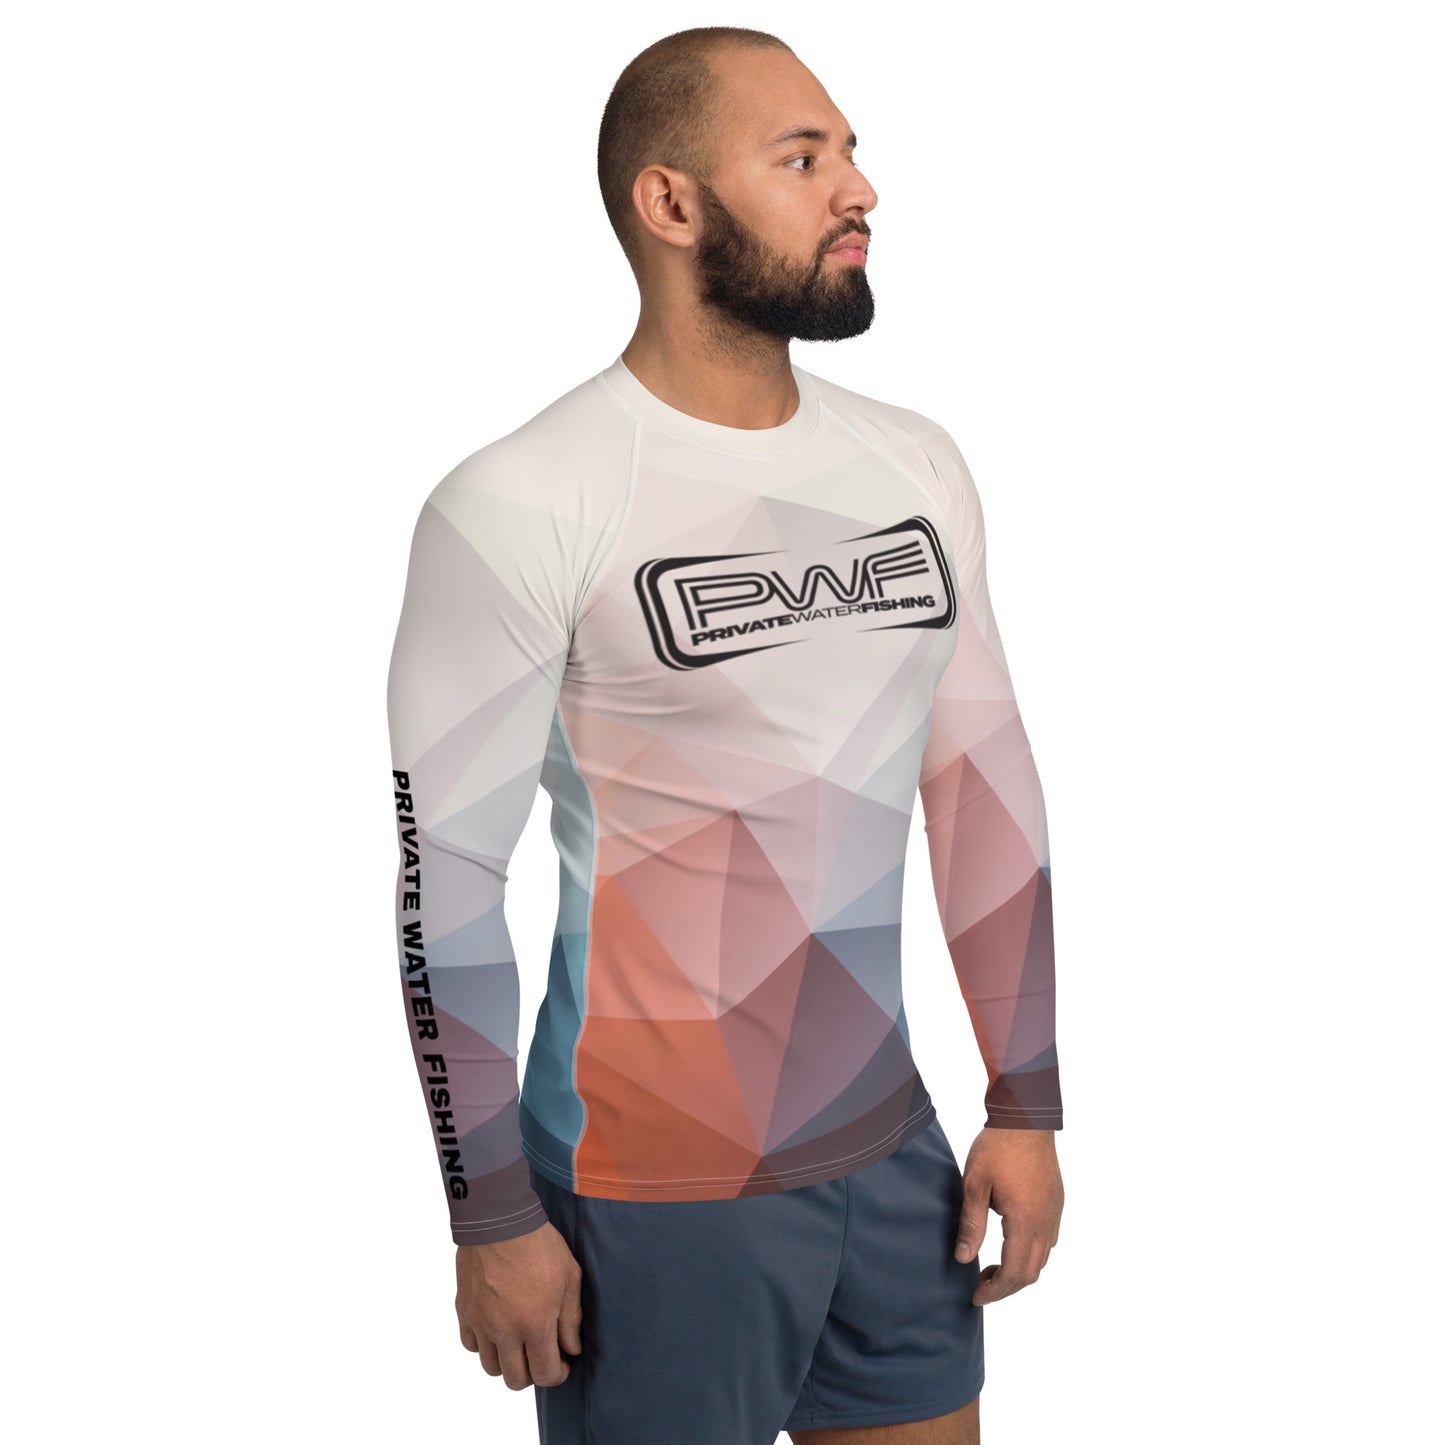 PWF Vented Long Sleeve